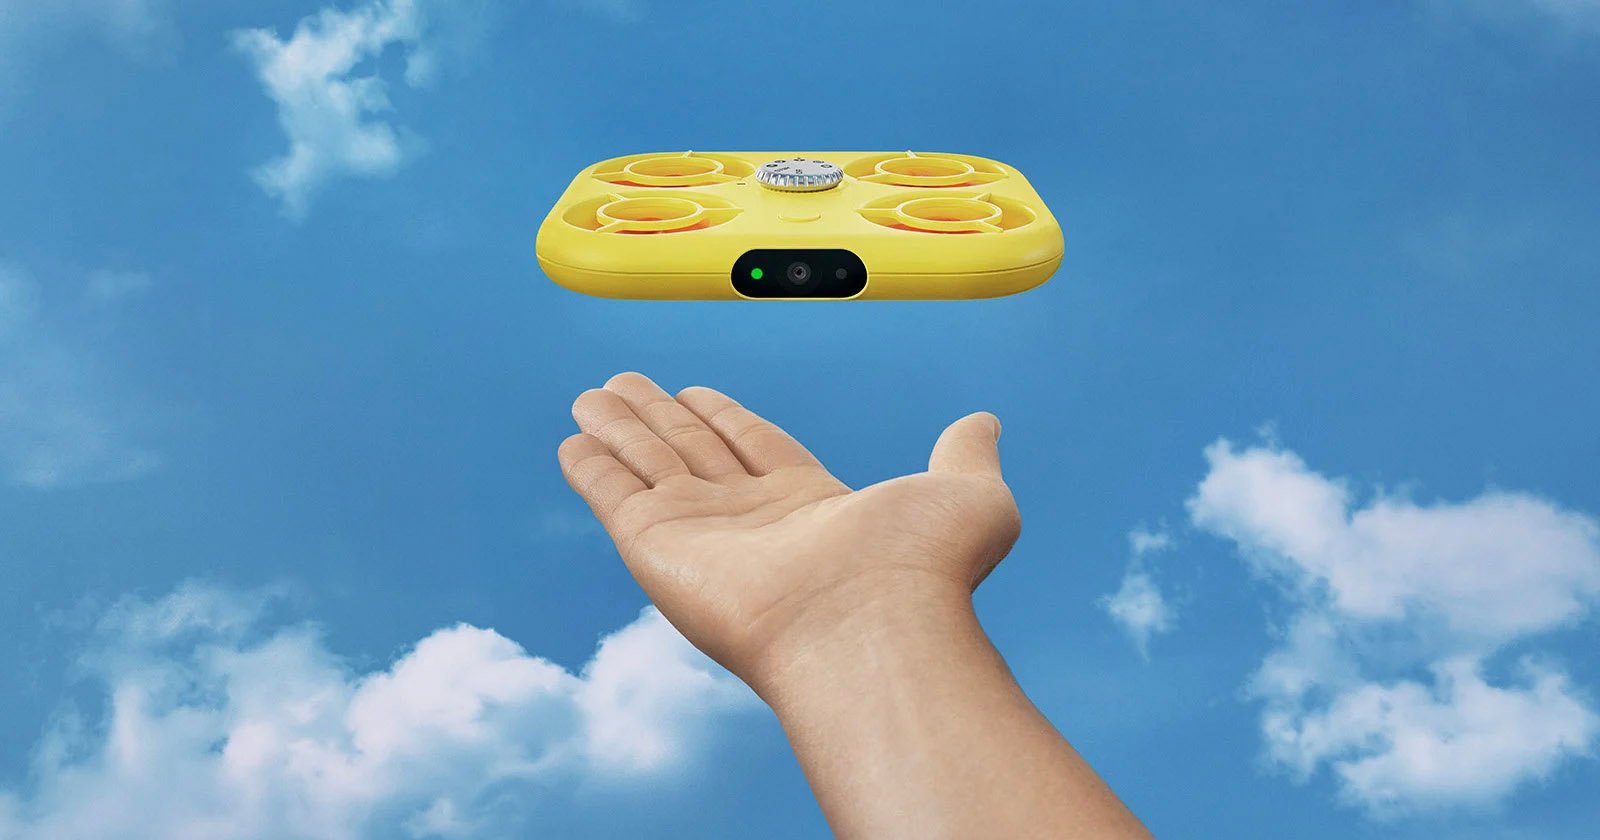  snap recalls failed pixy drone due risk its 